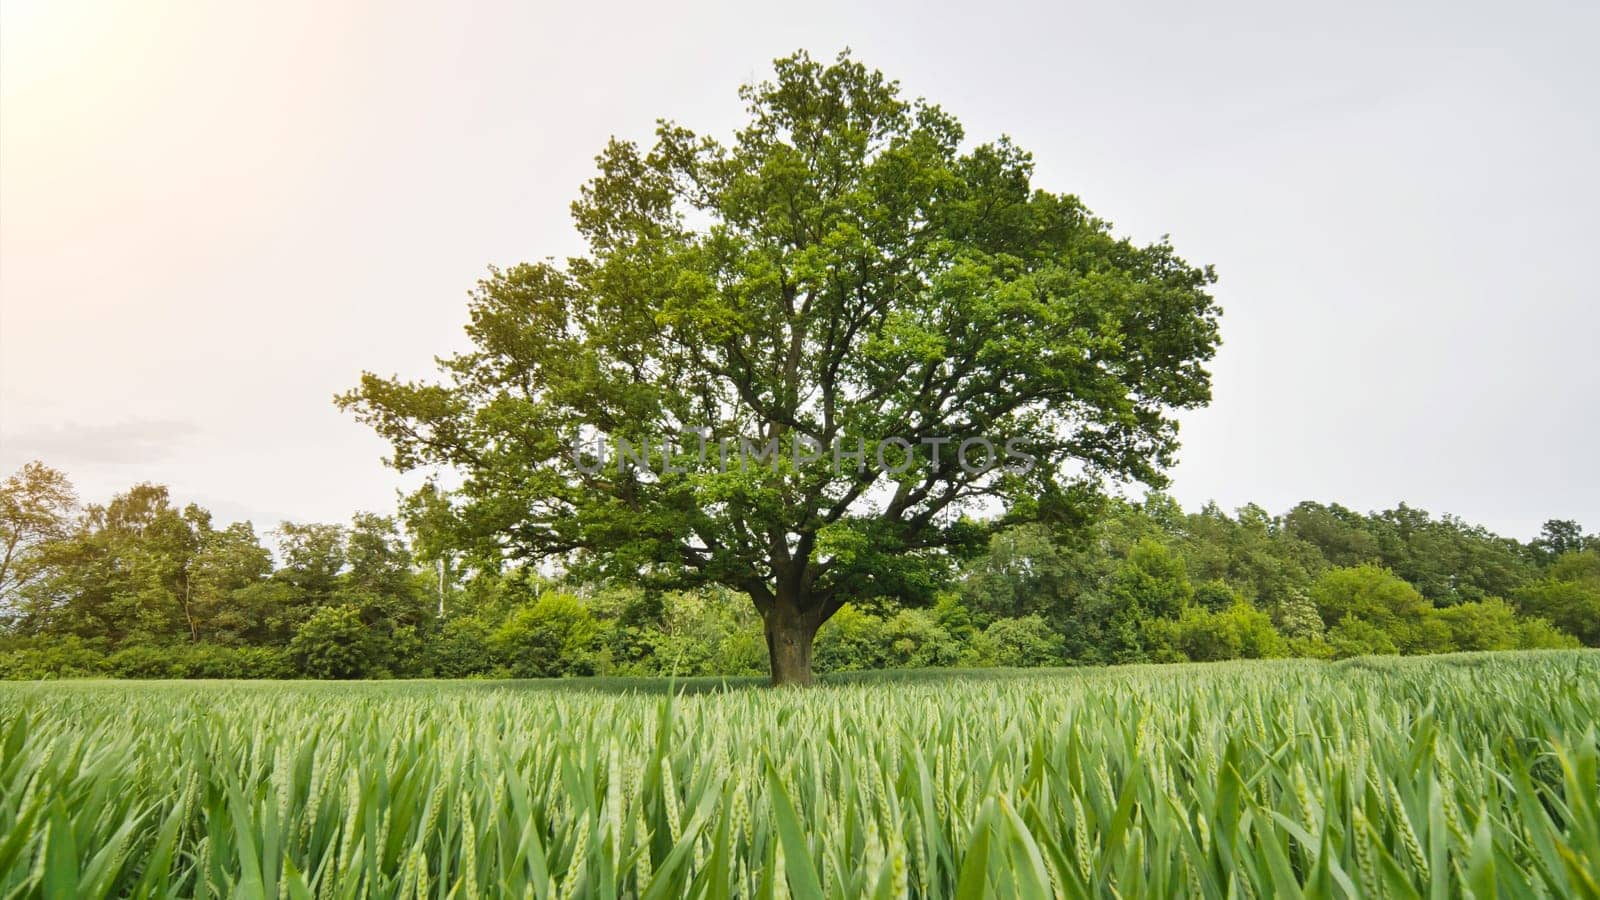 Movement to a lone oak tree among young green wheat. by DovidPro